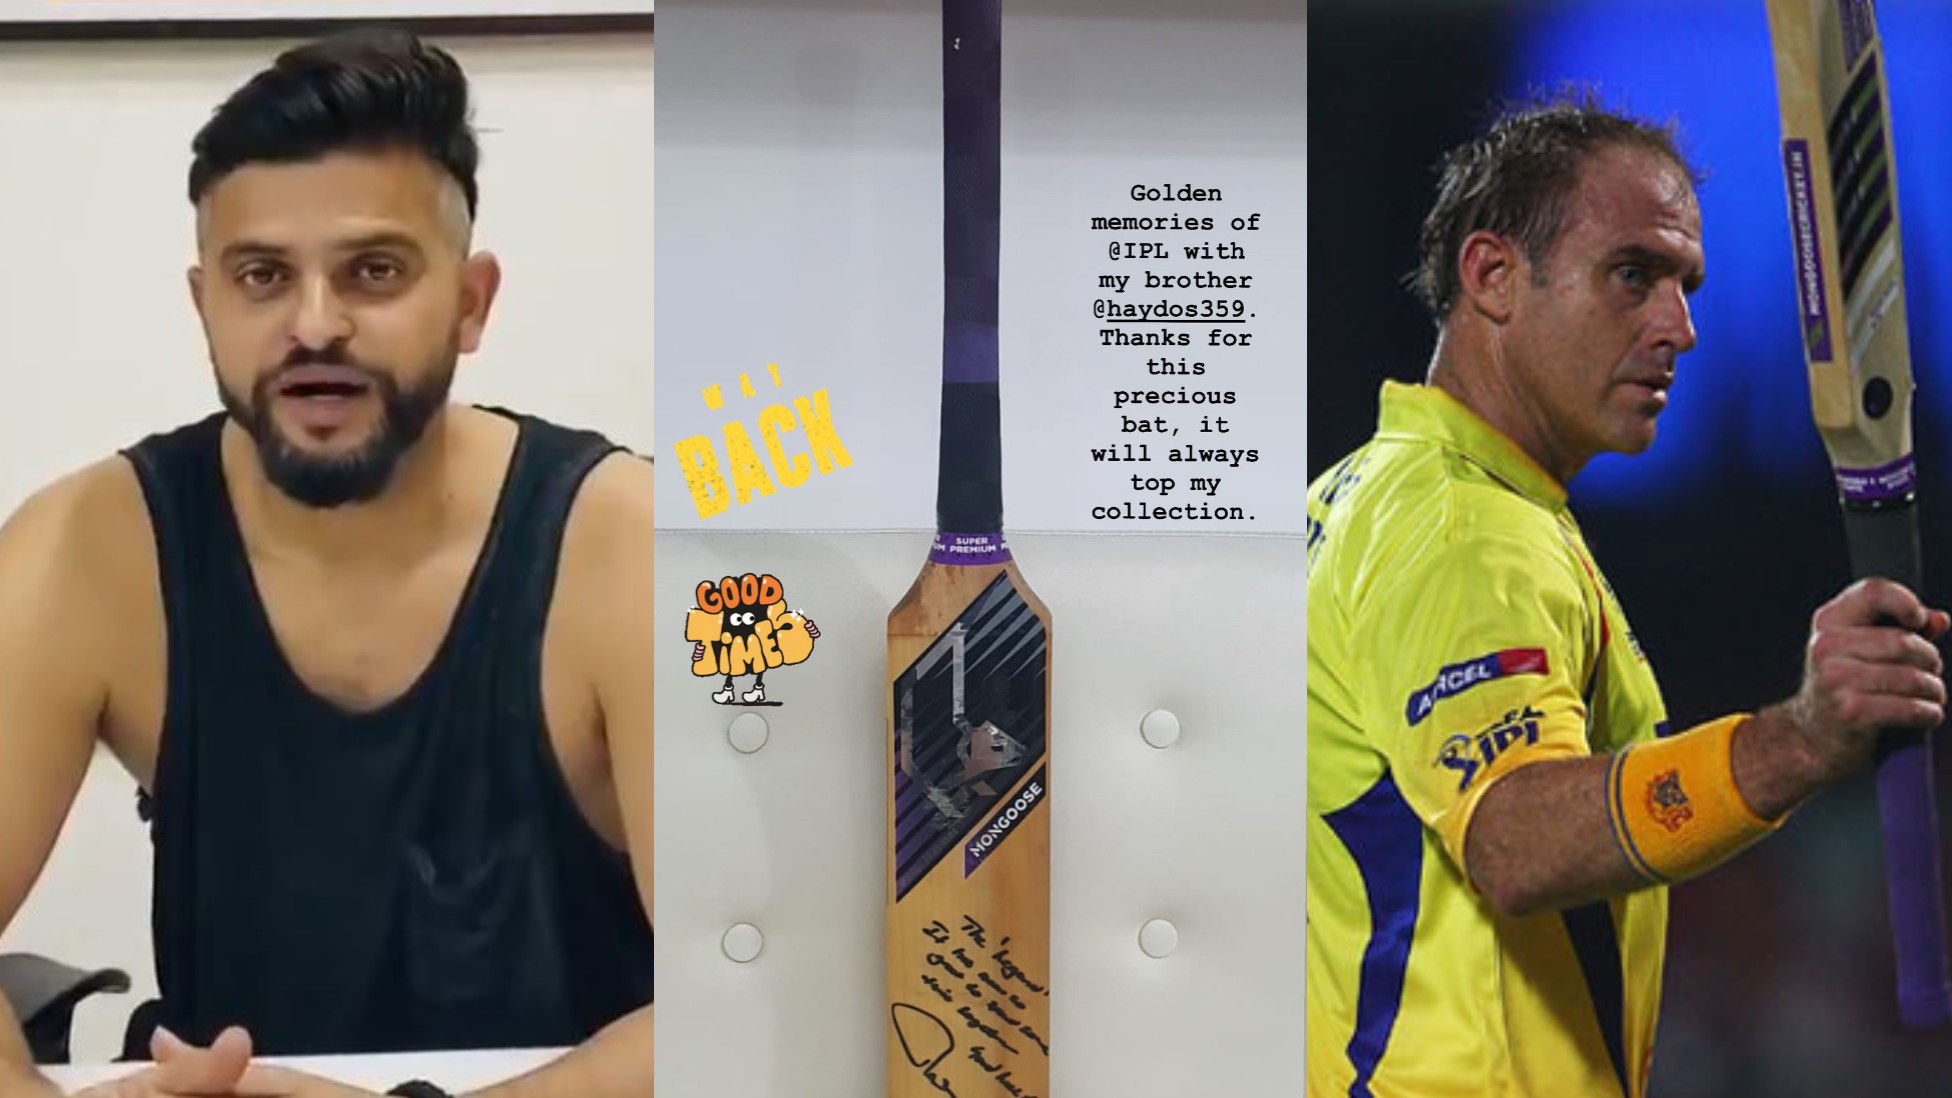 IPL: WATCH - Raina shares his favorite CSK memory; shows mongoose bat signed by Hayden